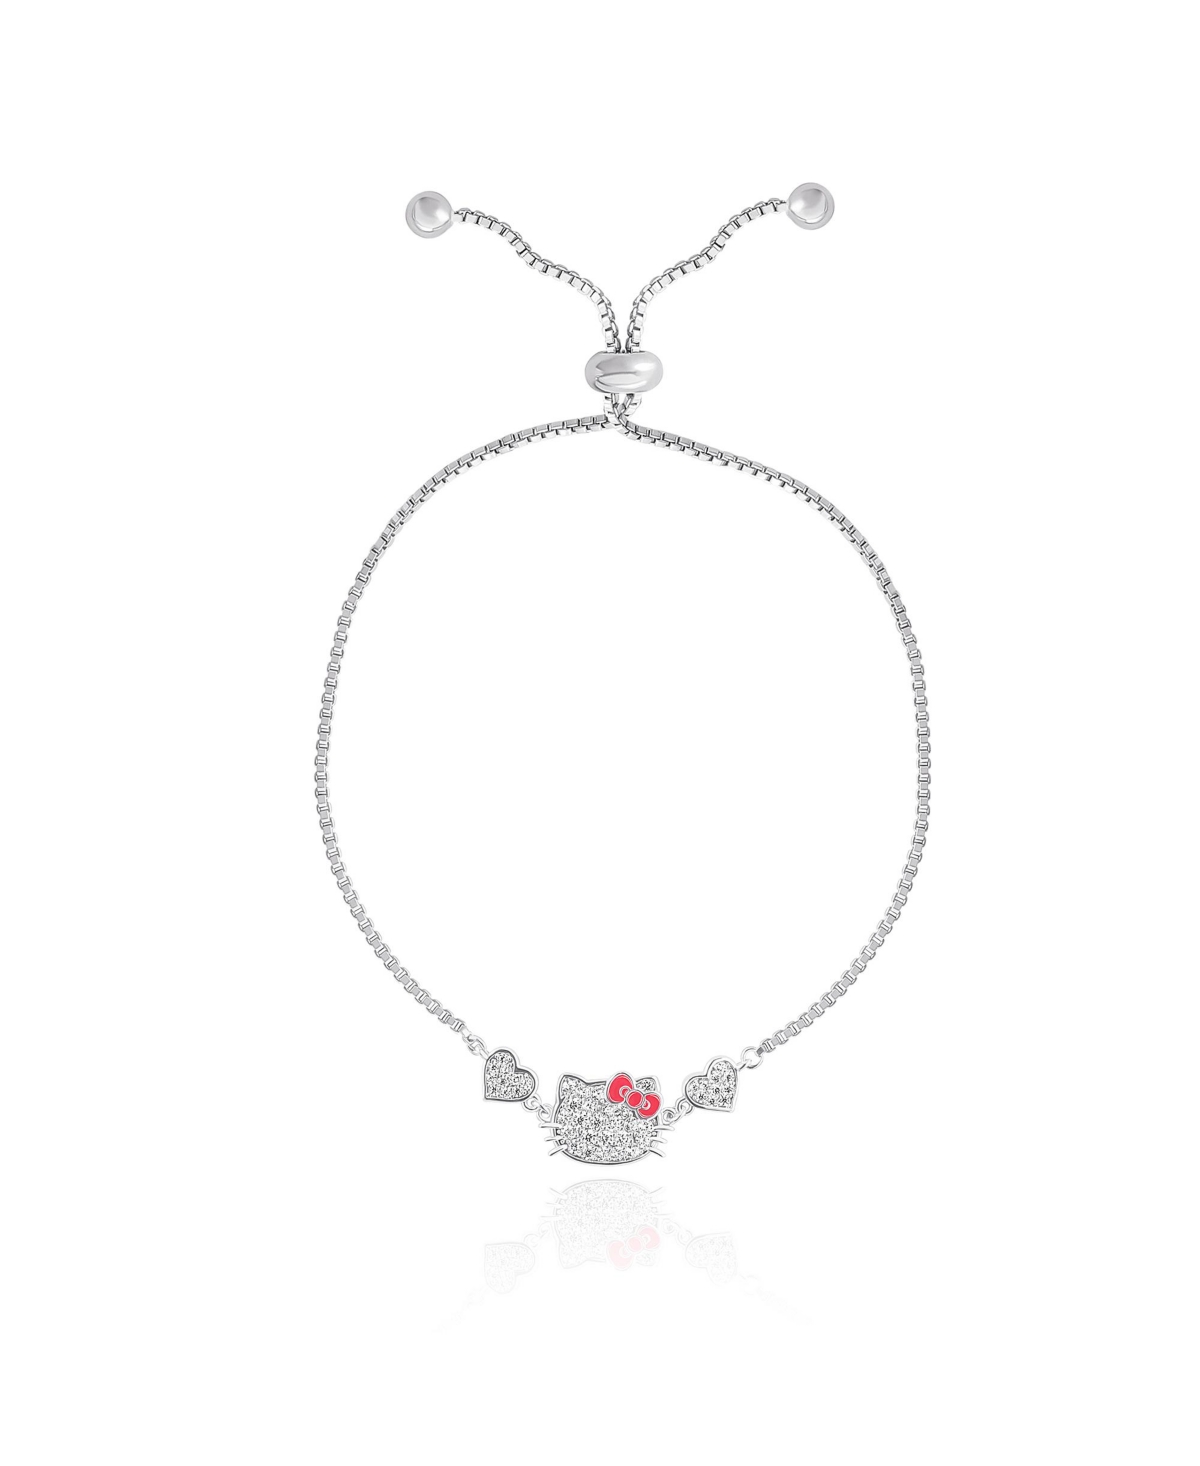 Sanrio Hello Kitty Women's Heart Lariat Bracelet, Silver-Plated and Pave Cubic Zirconia Bracelet Official License - Silver tone